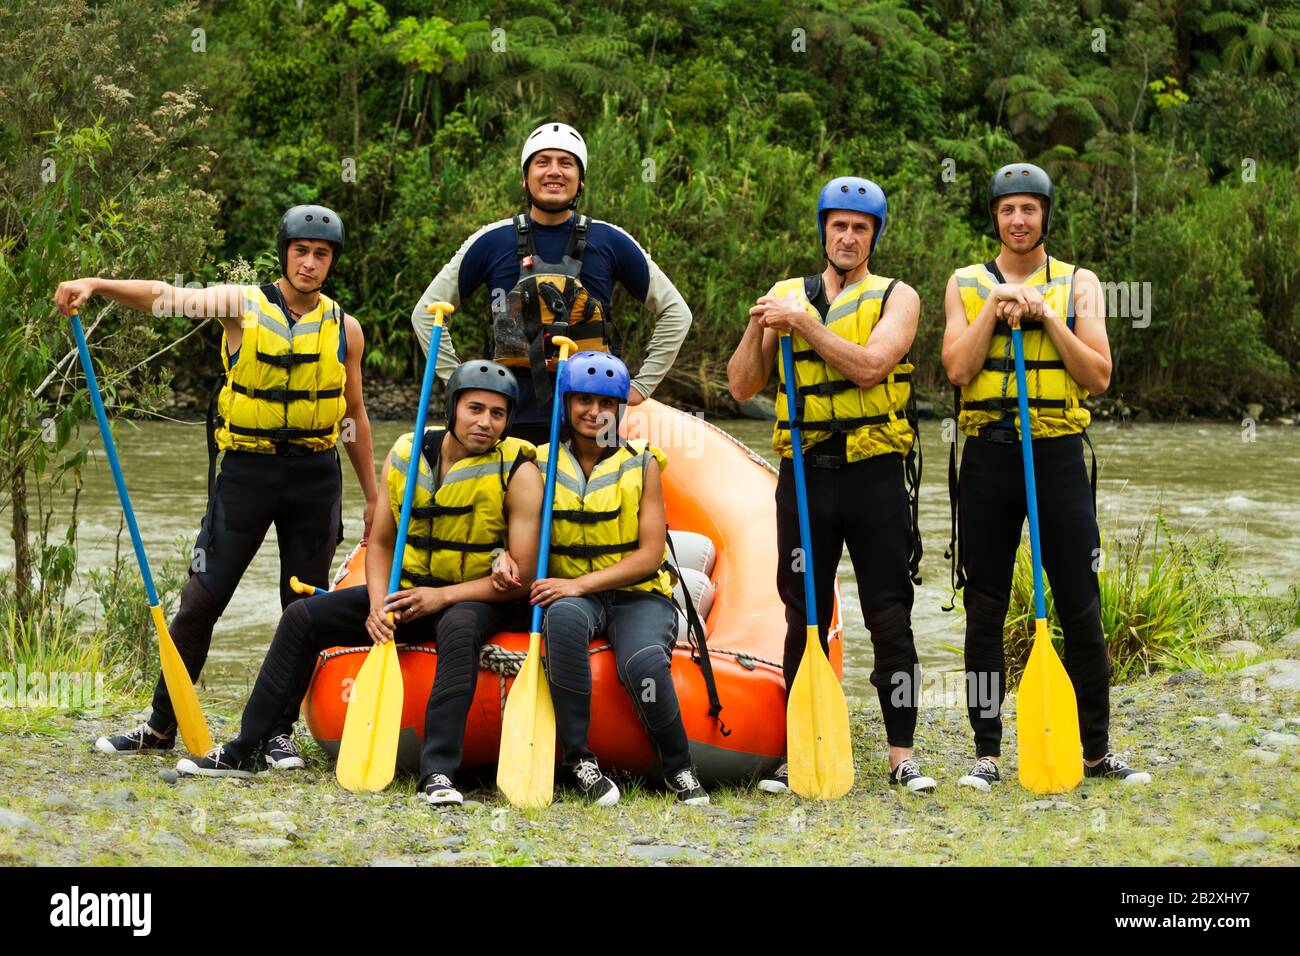 Large Crowd Of Teen People Ready To Go Rafting Stock Photo